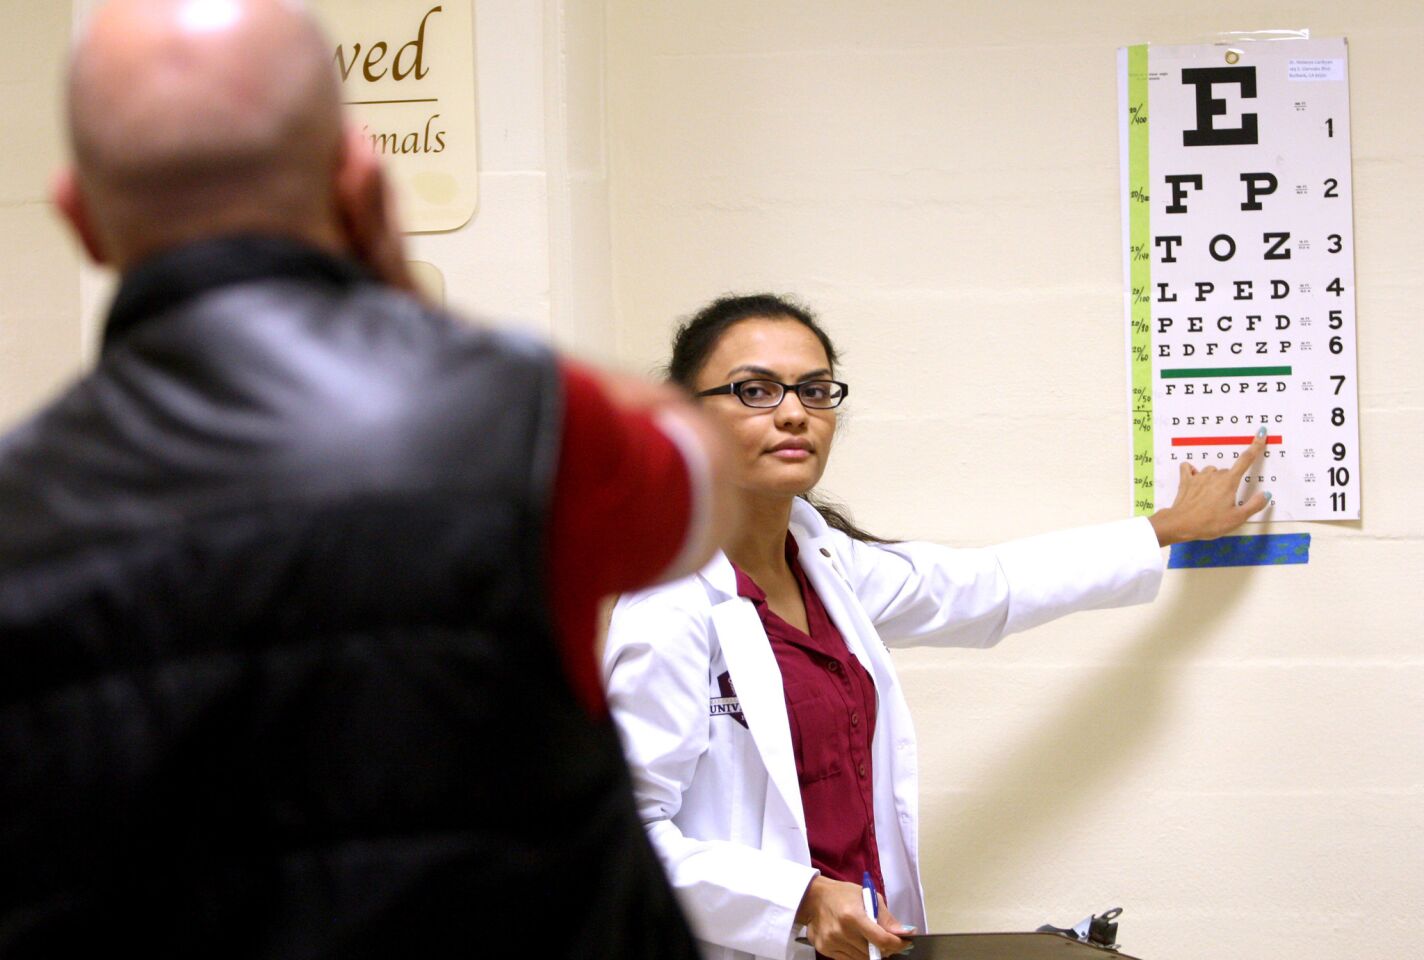 Kristen Omi, student at Southern California College of Optometry, right, gives a visual acuity test to an attendee at the Sixth Annual Glendale Health Festival at the Glendale Civic Auditorium in Glendale on Saturday, November 7, 2015.